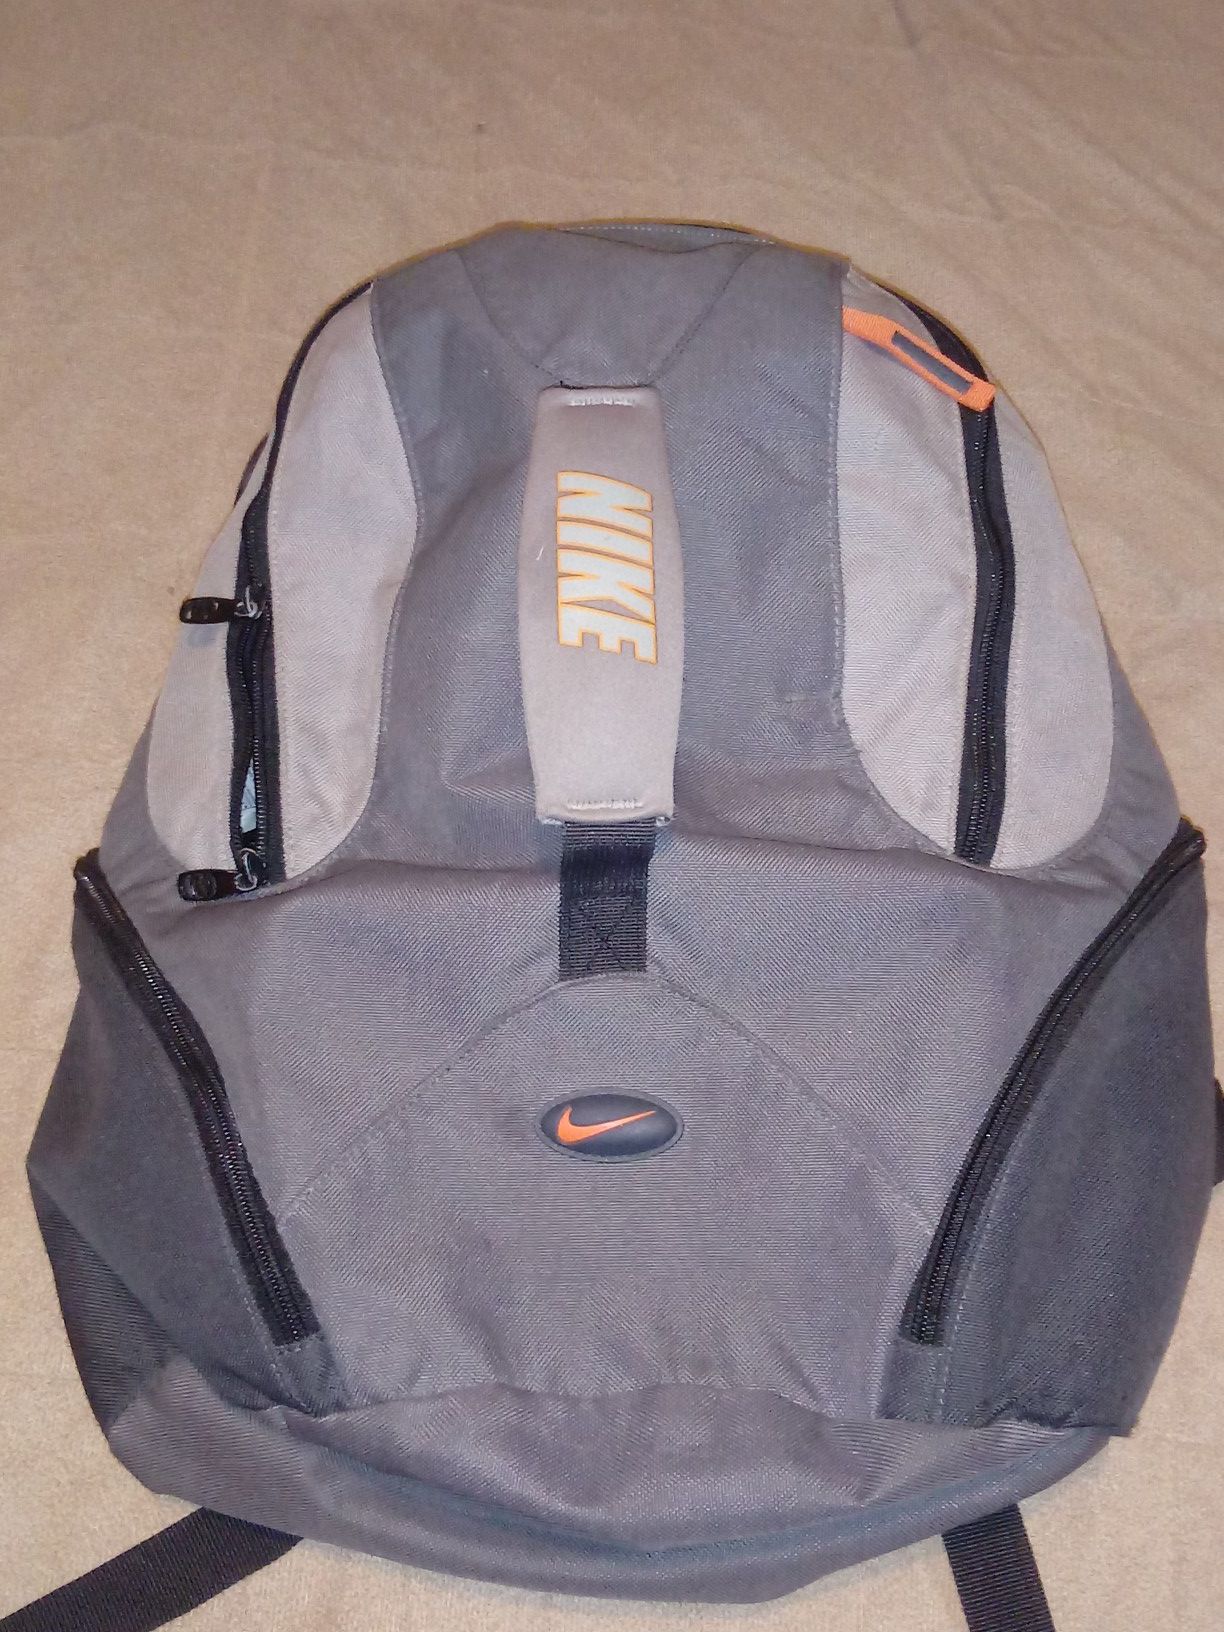 Late 90's or 2000's nike backpack